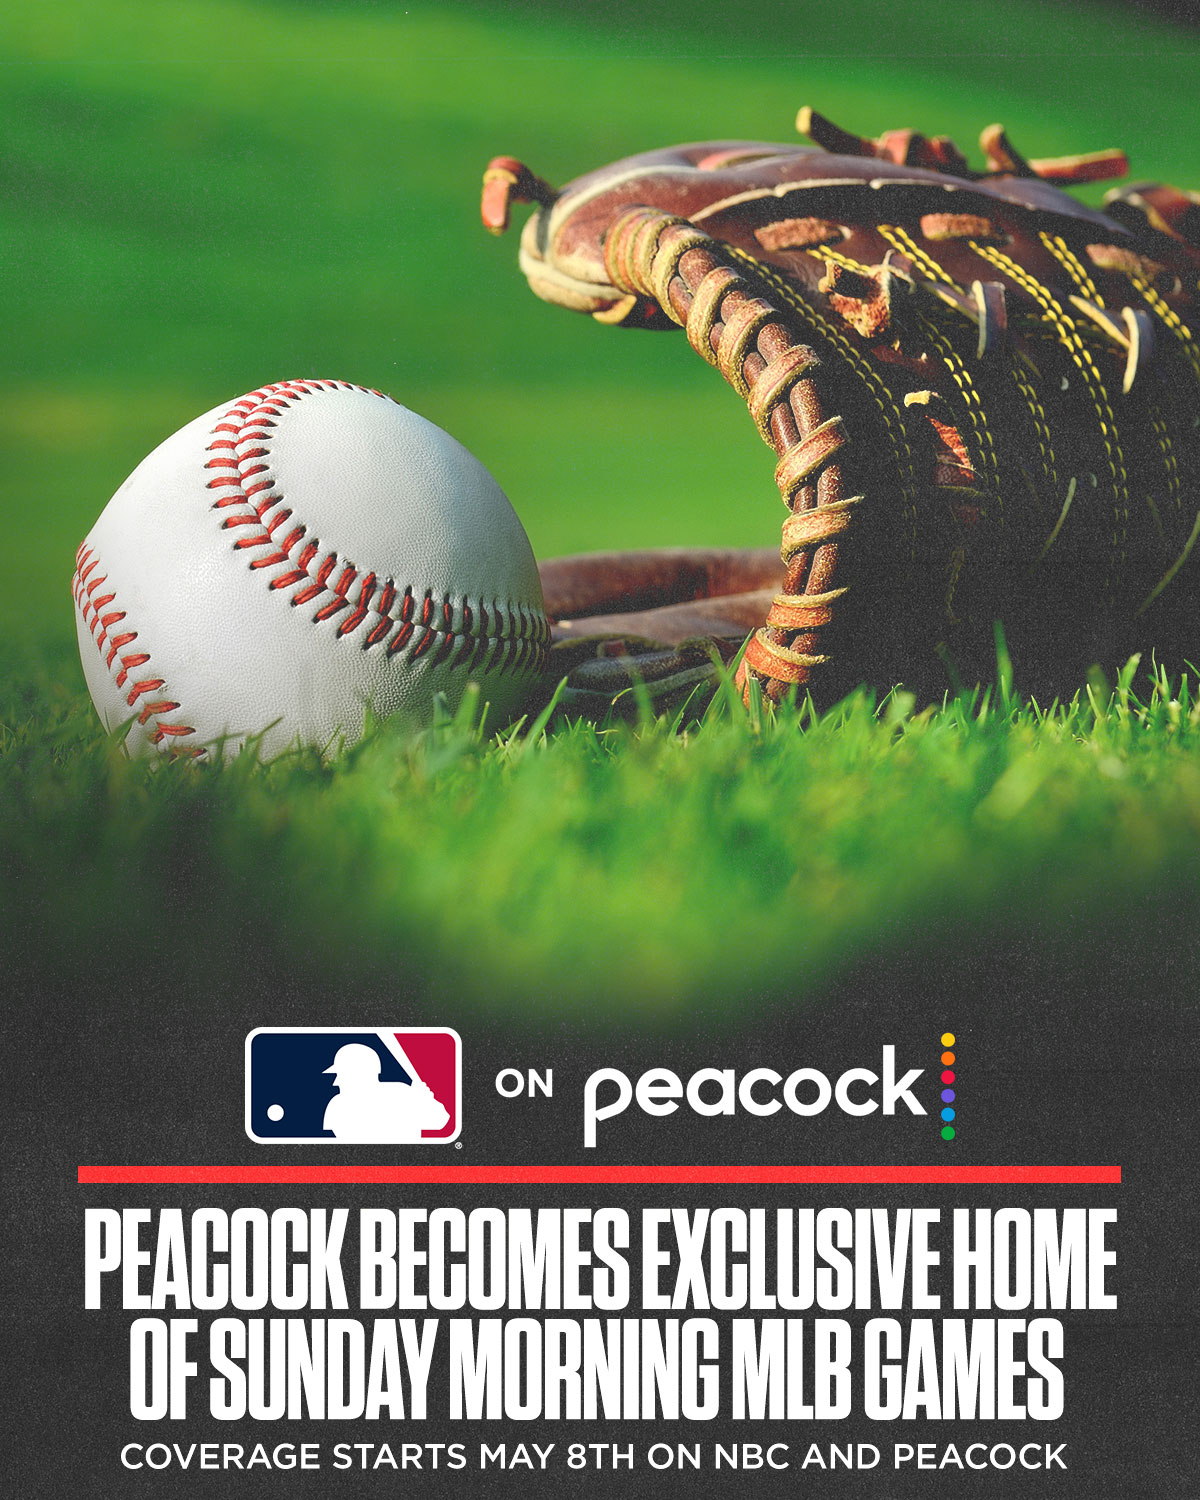 PEACOCK BECOMES EXCLUSIVE HOME OF NEW SUNDAY MORNING MAJOR LEAGUE BASEBALL GAME PACKAGE, TO BE PRODUCED BY NBC SPORTS, BEGINNING IN MAY